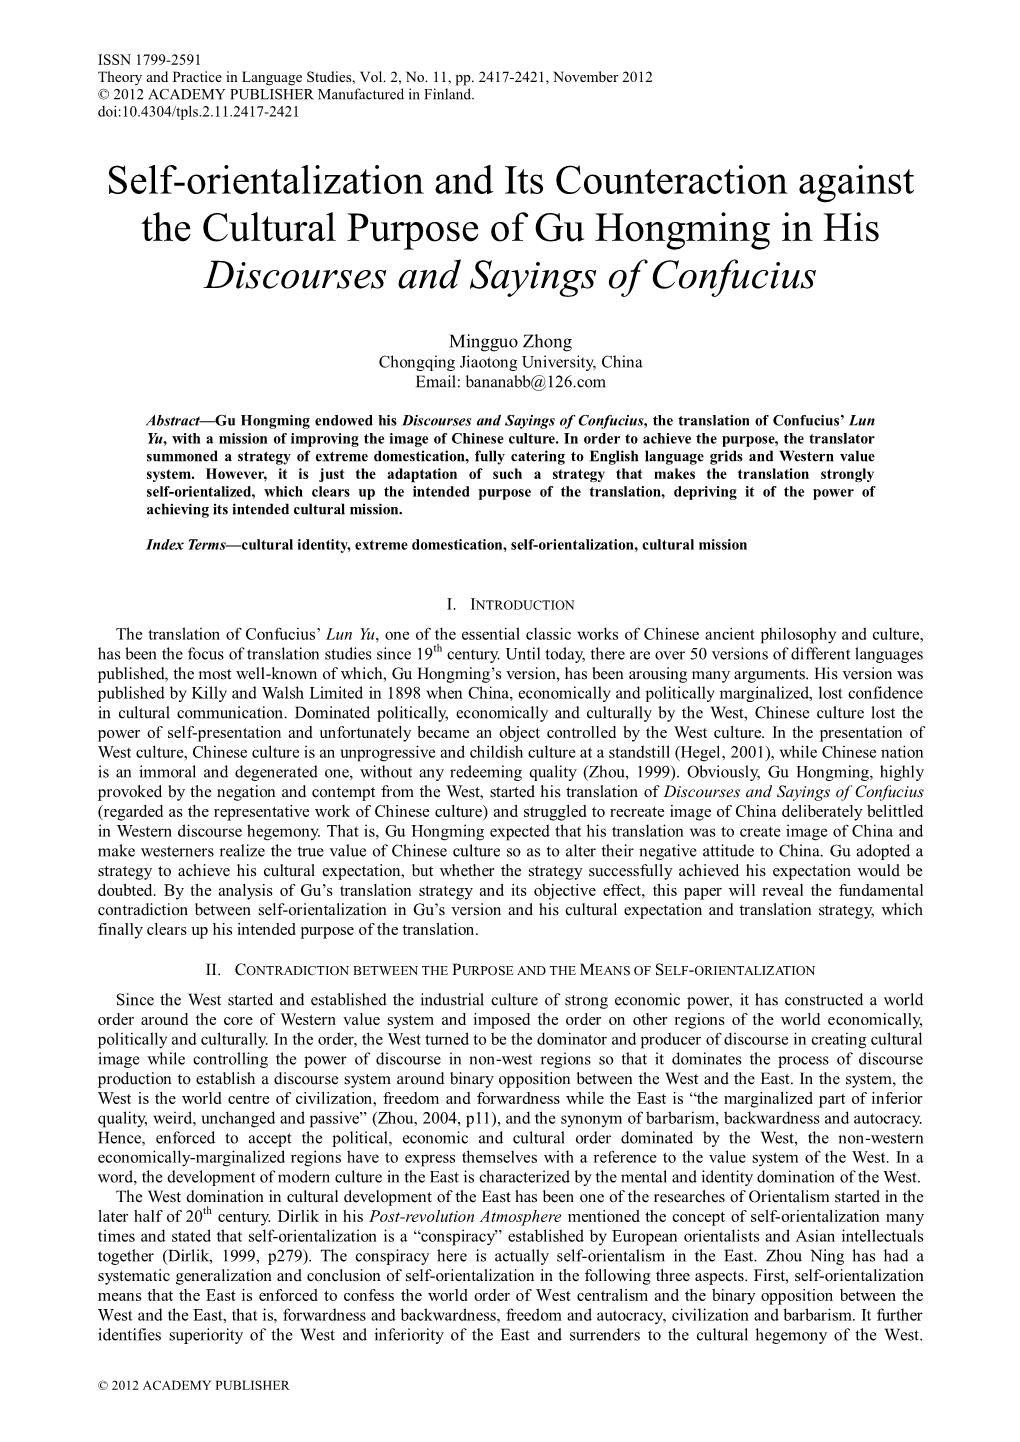 Self-Orientalization and Its Counteraction Against the Cultural Purpose of Gu Hongming in His Discourses and Sayings of Confucius